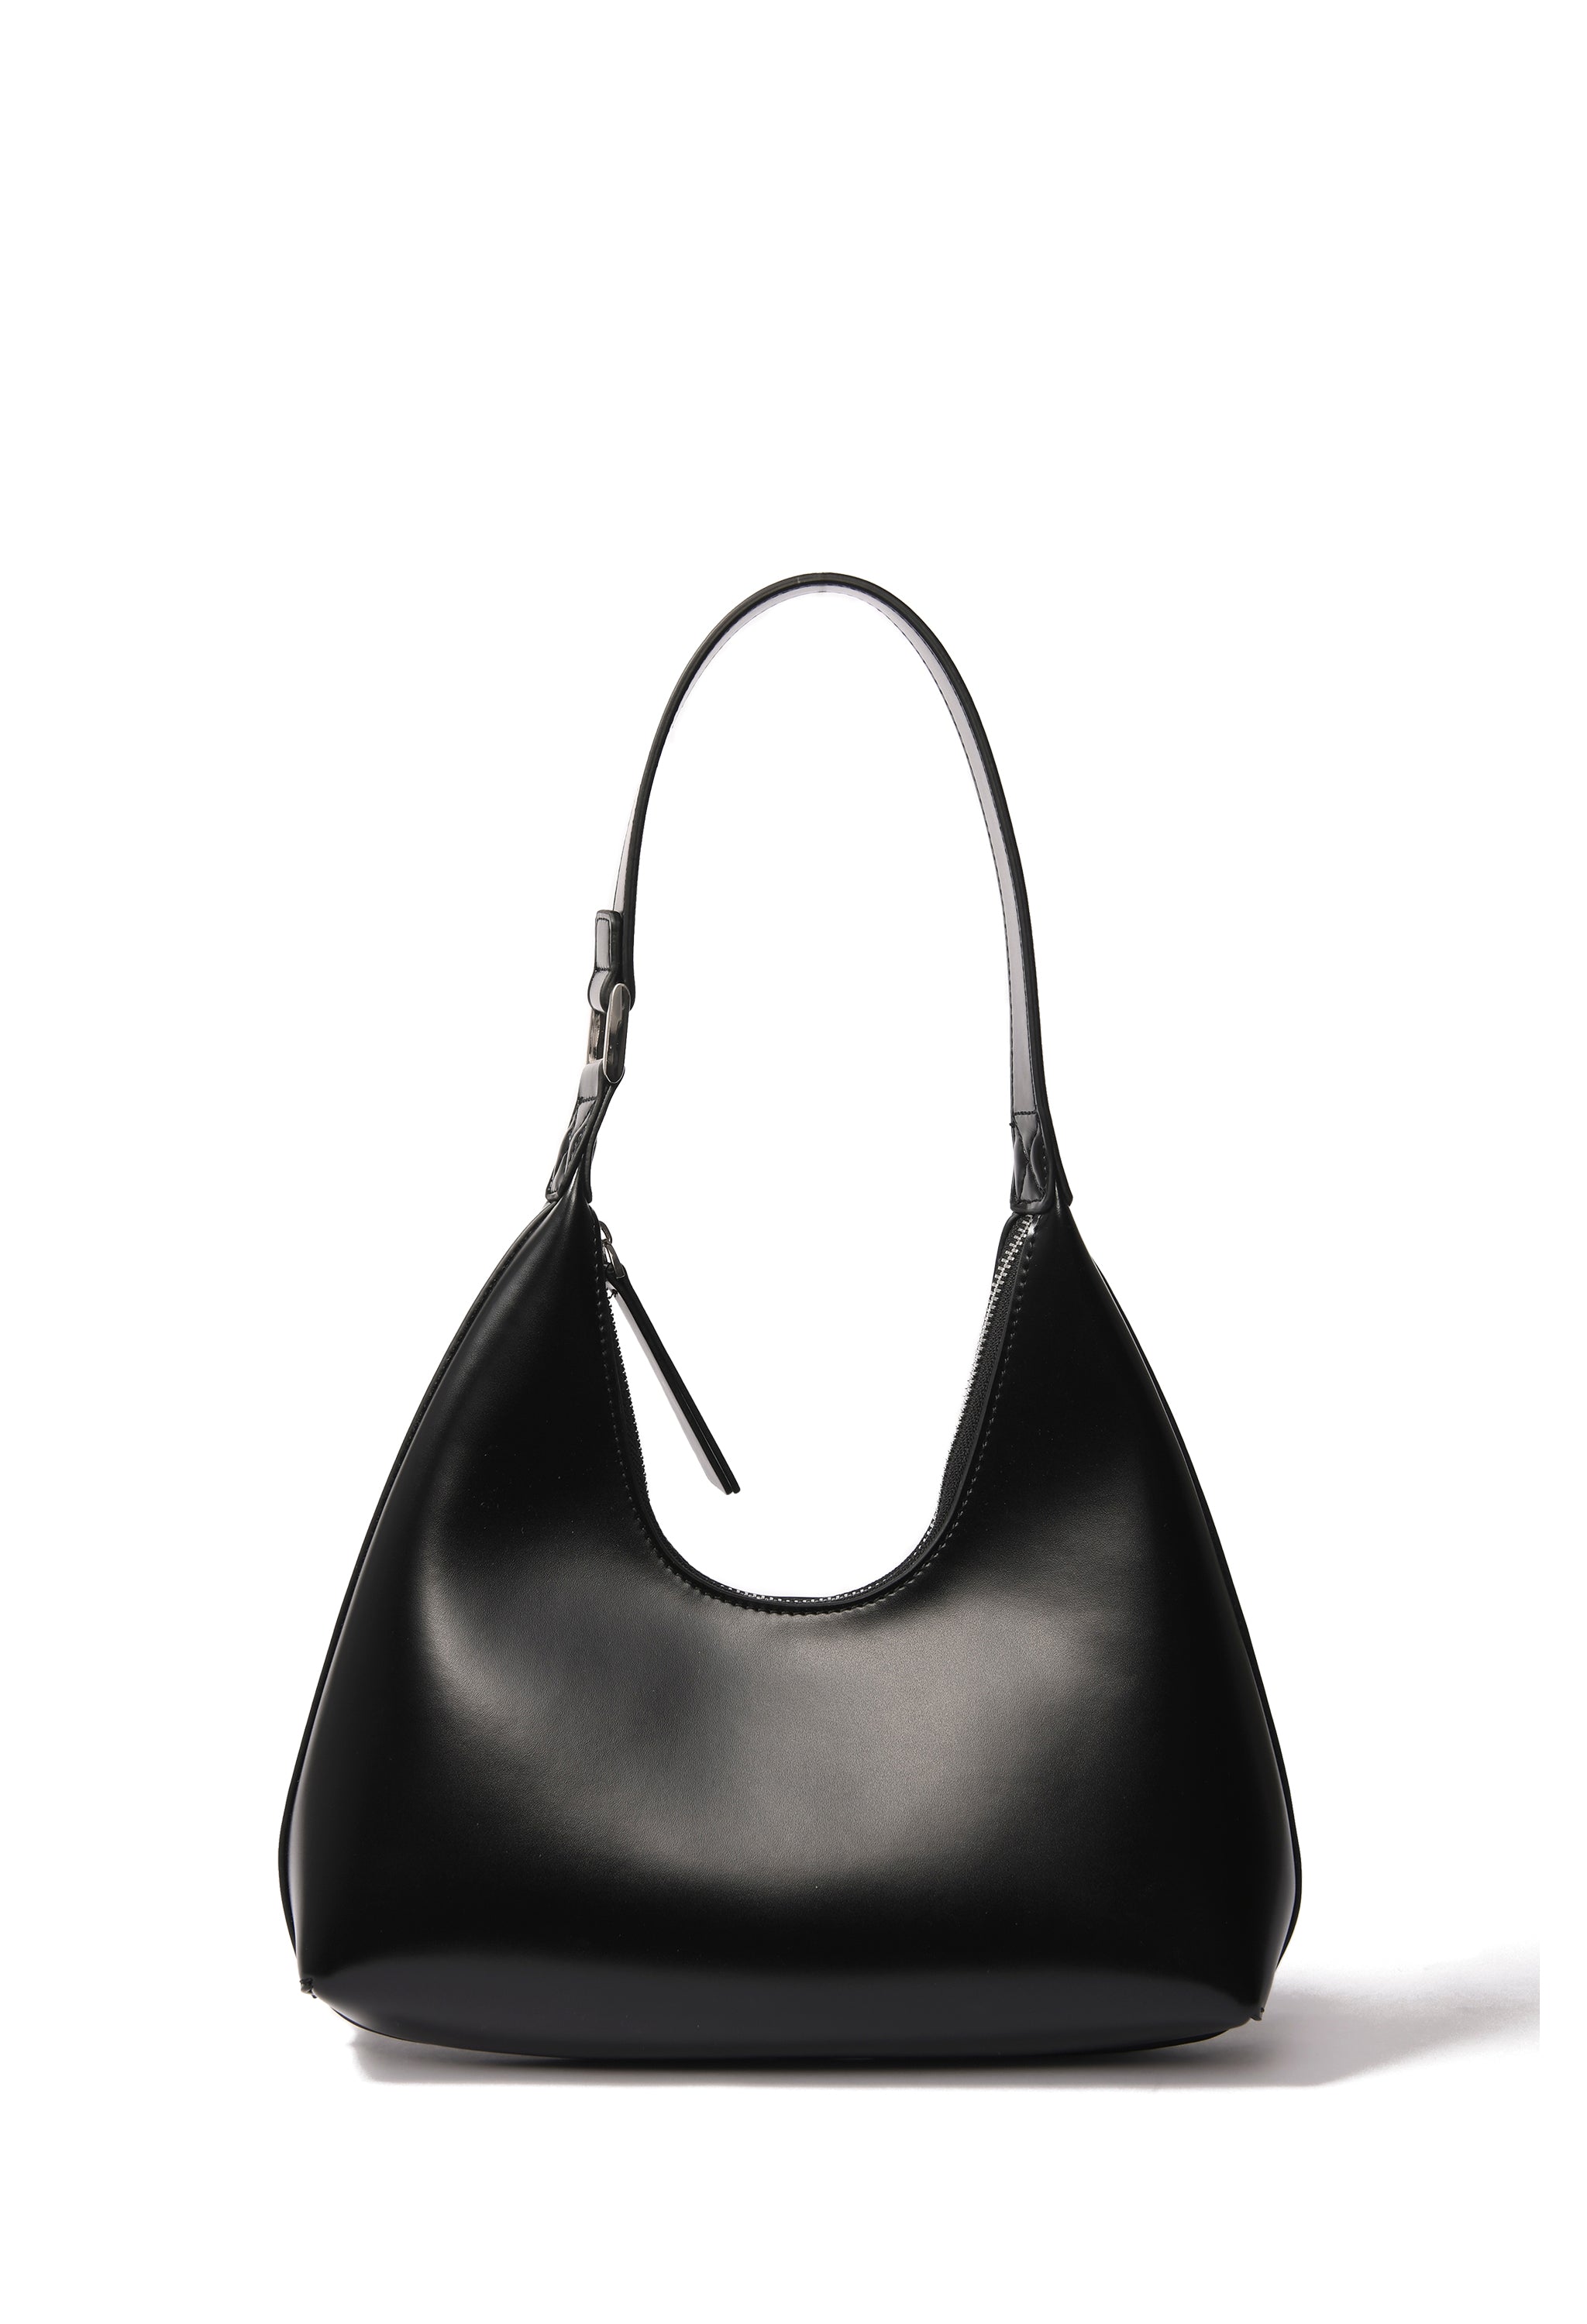 Alexia Bag in smooth leather, Black